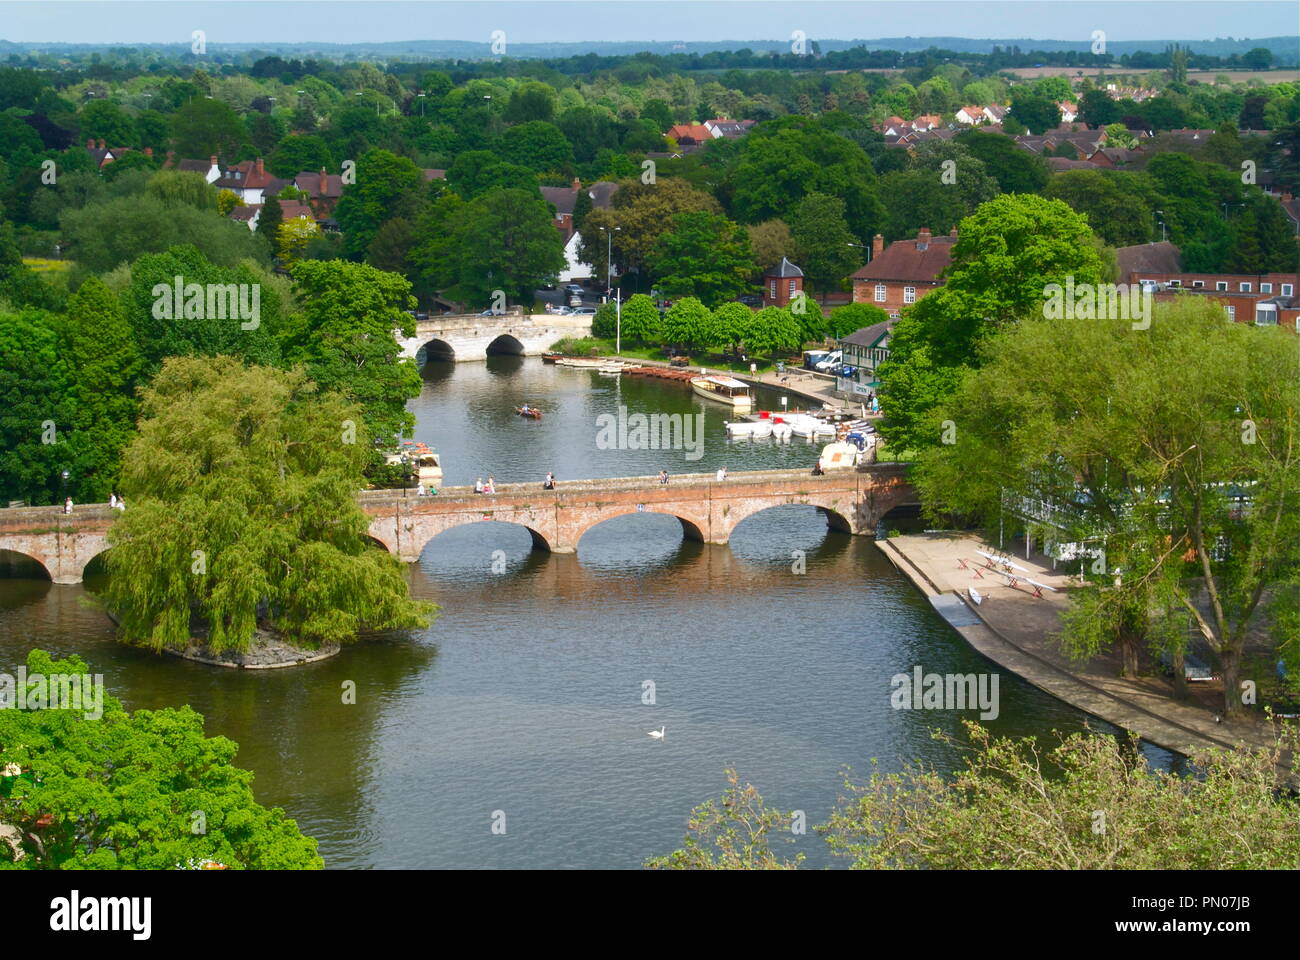 Stratford on Avon, From Above. Stock Photo